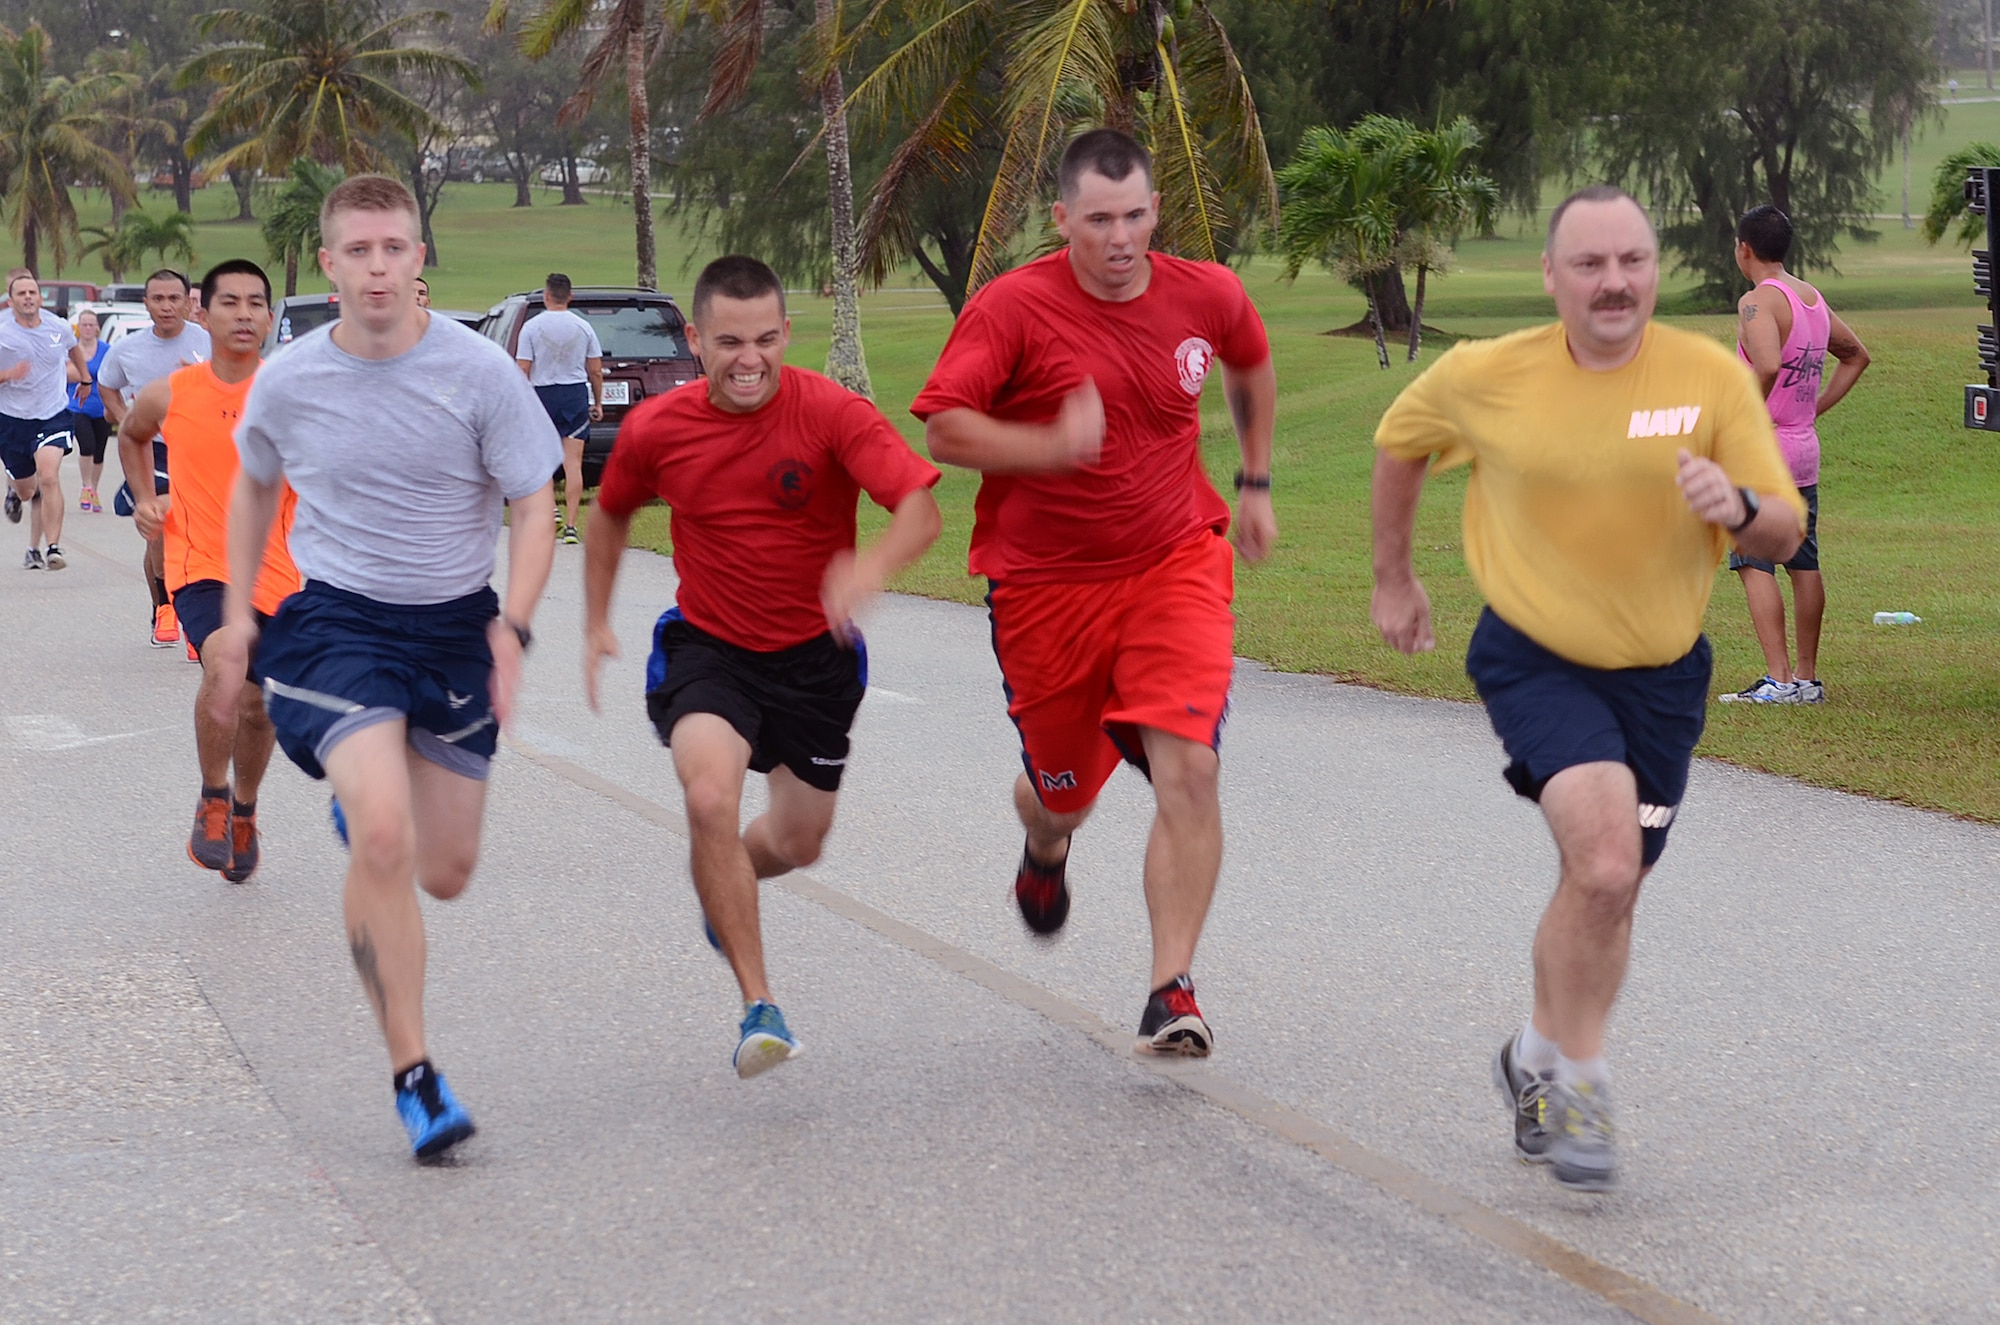 Runners compete to finish first during the April Fool’s 5K at the Palm Tree Golf Course on Andersen Air Force Base, Guam, April 1, 2015. As an April Fool’s Day joke, runners were told by event coordinators the course had been changed to a half marathon instead of a 5K. (U.S. Air Force photo by Airman 1st Class Alexa Ann Henderson/Released)